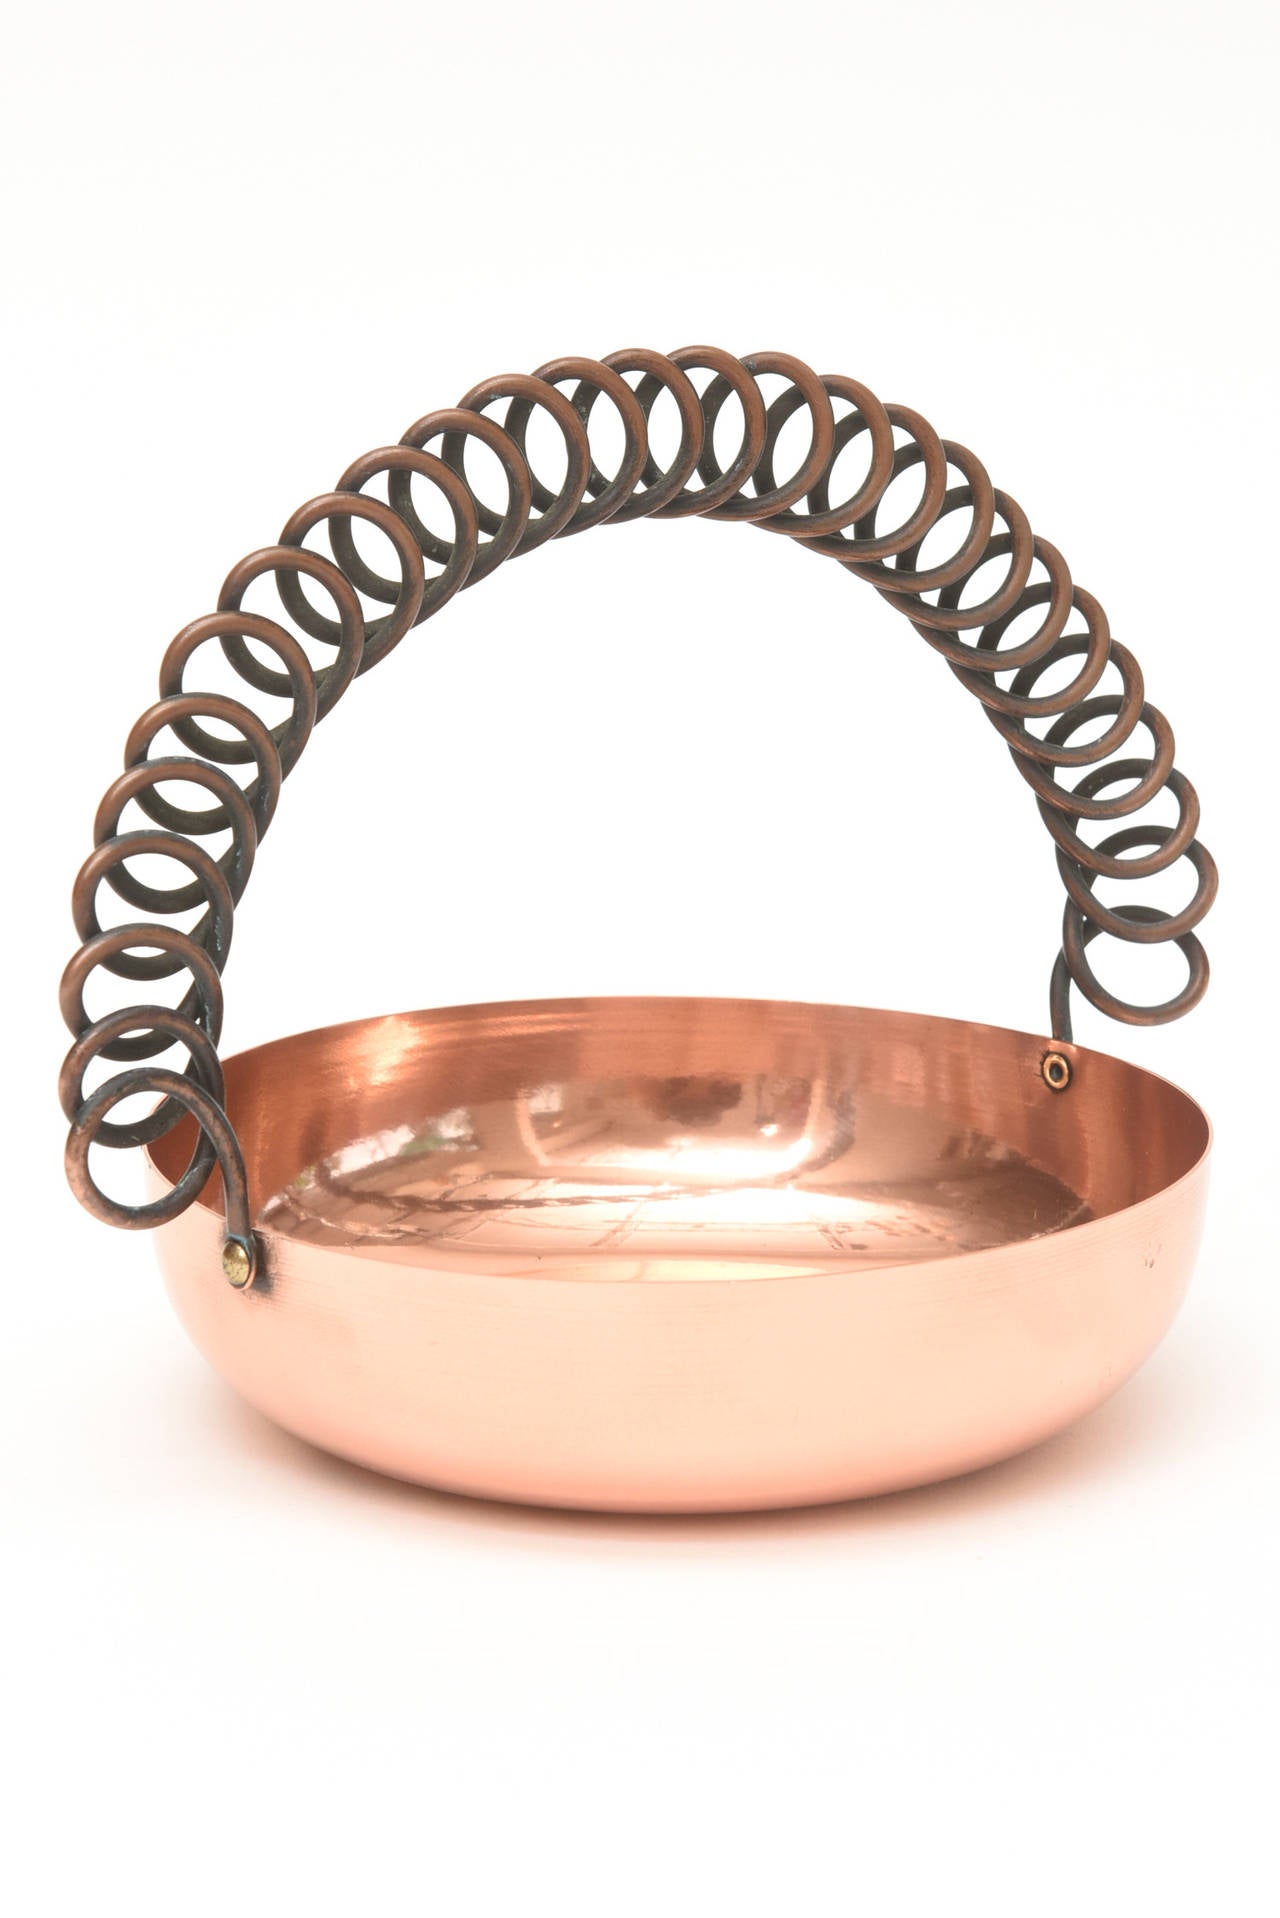 This vintage polished copper small bowl that has the sculptural looped handle is hallmarked Rebajes with it's symbol. The looped metal handle is another form of darkened metal. An unusual Mexican bowl.